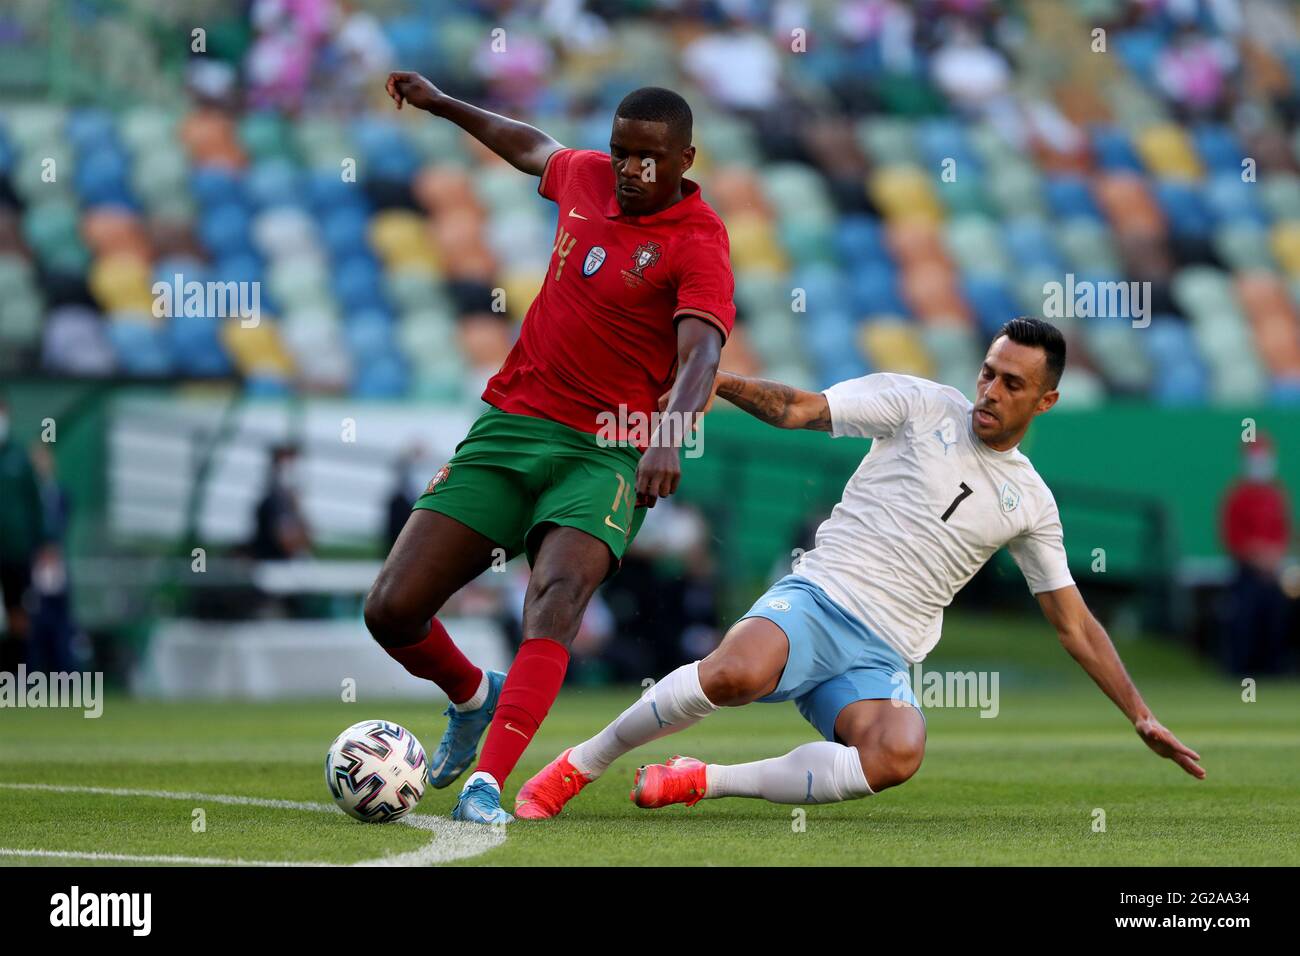 Lisbon, Portugal. 9th June, 2021. William Carvalho of Portugal (L) vies with Eran Zahavi of Israel during the international friendly football match between Portugal and Israel, at the Jose Alvalade stadium in Lisbon, Portugal, on June 9, 2021, ahead of the UEFA EURO 2020 European Championship. Credit: Pedro Fiuza/ZUMA Wire/Alamy Live News Stock Photo